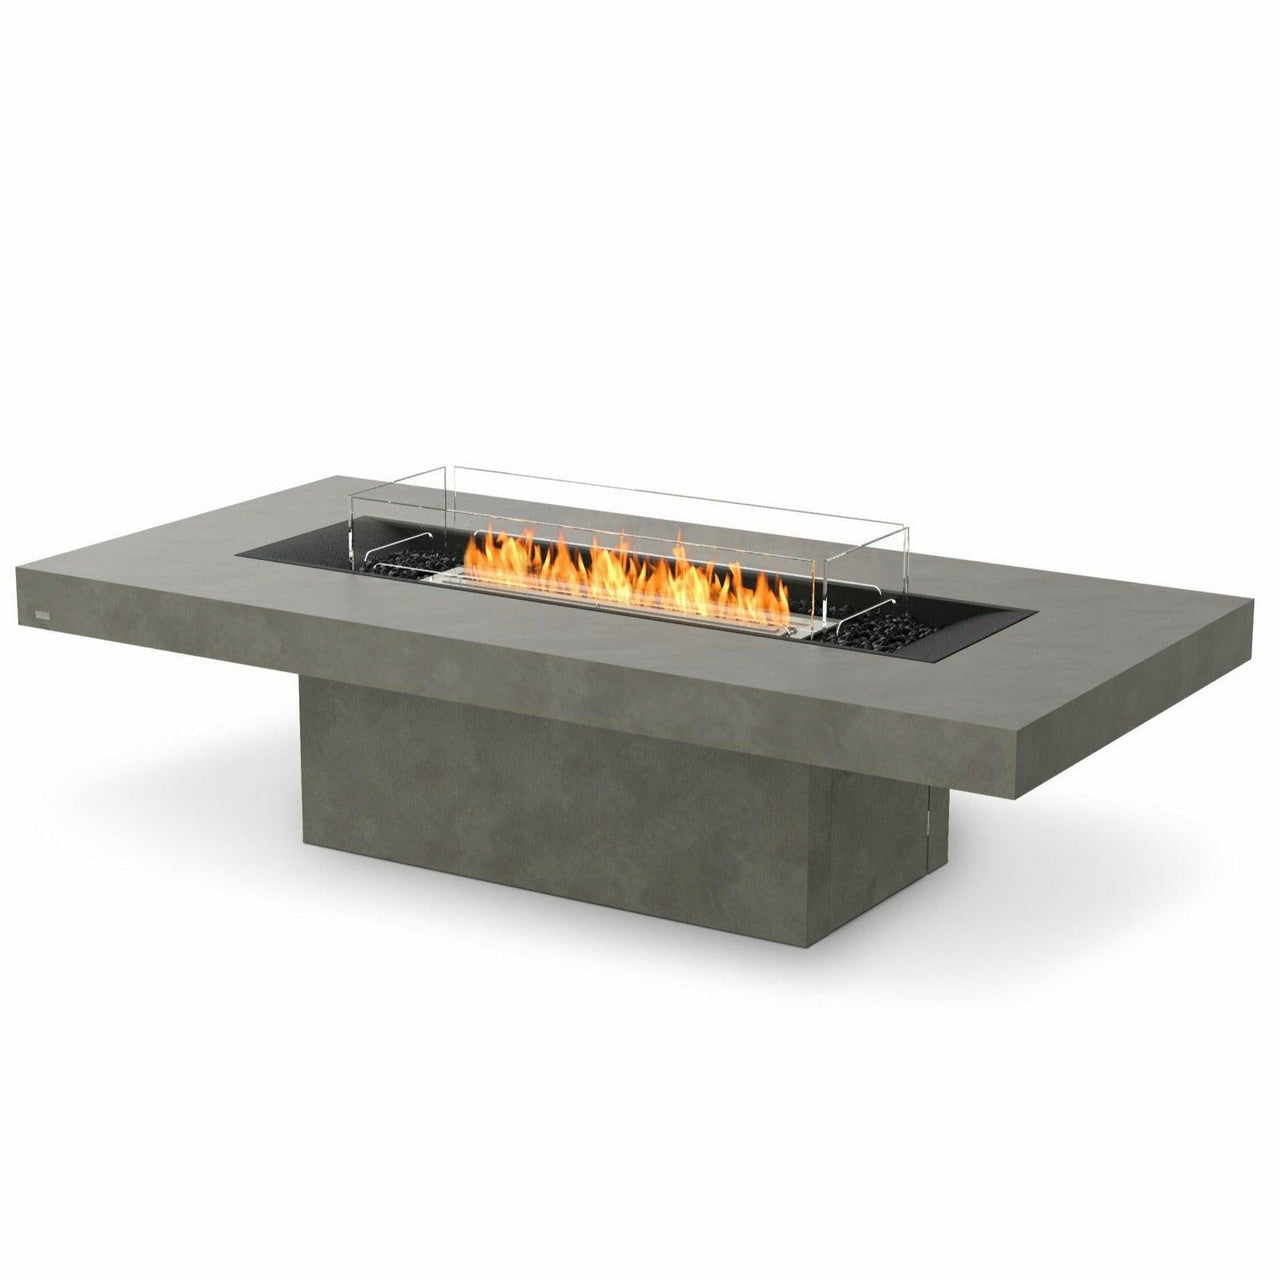 EcoSmart Fire - Gin 90" (Chat) Rectangular Concrete Fire Pit Table - Fire Pit Stock